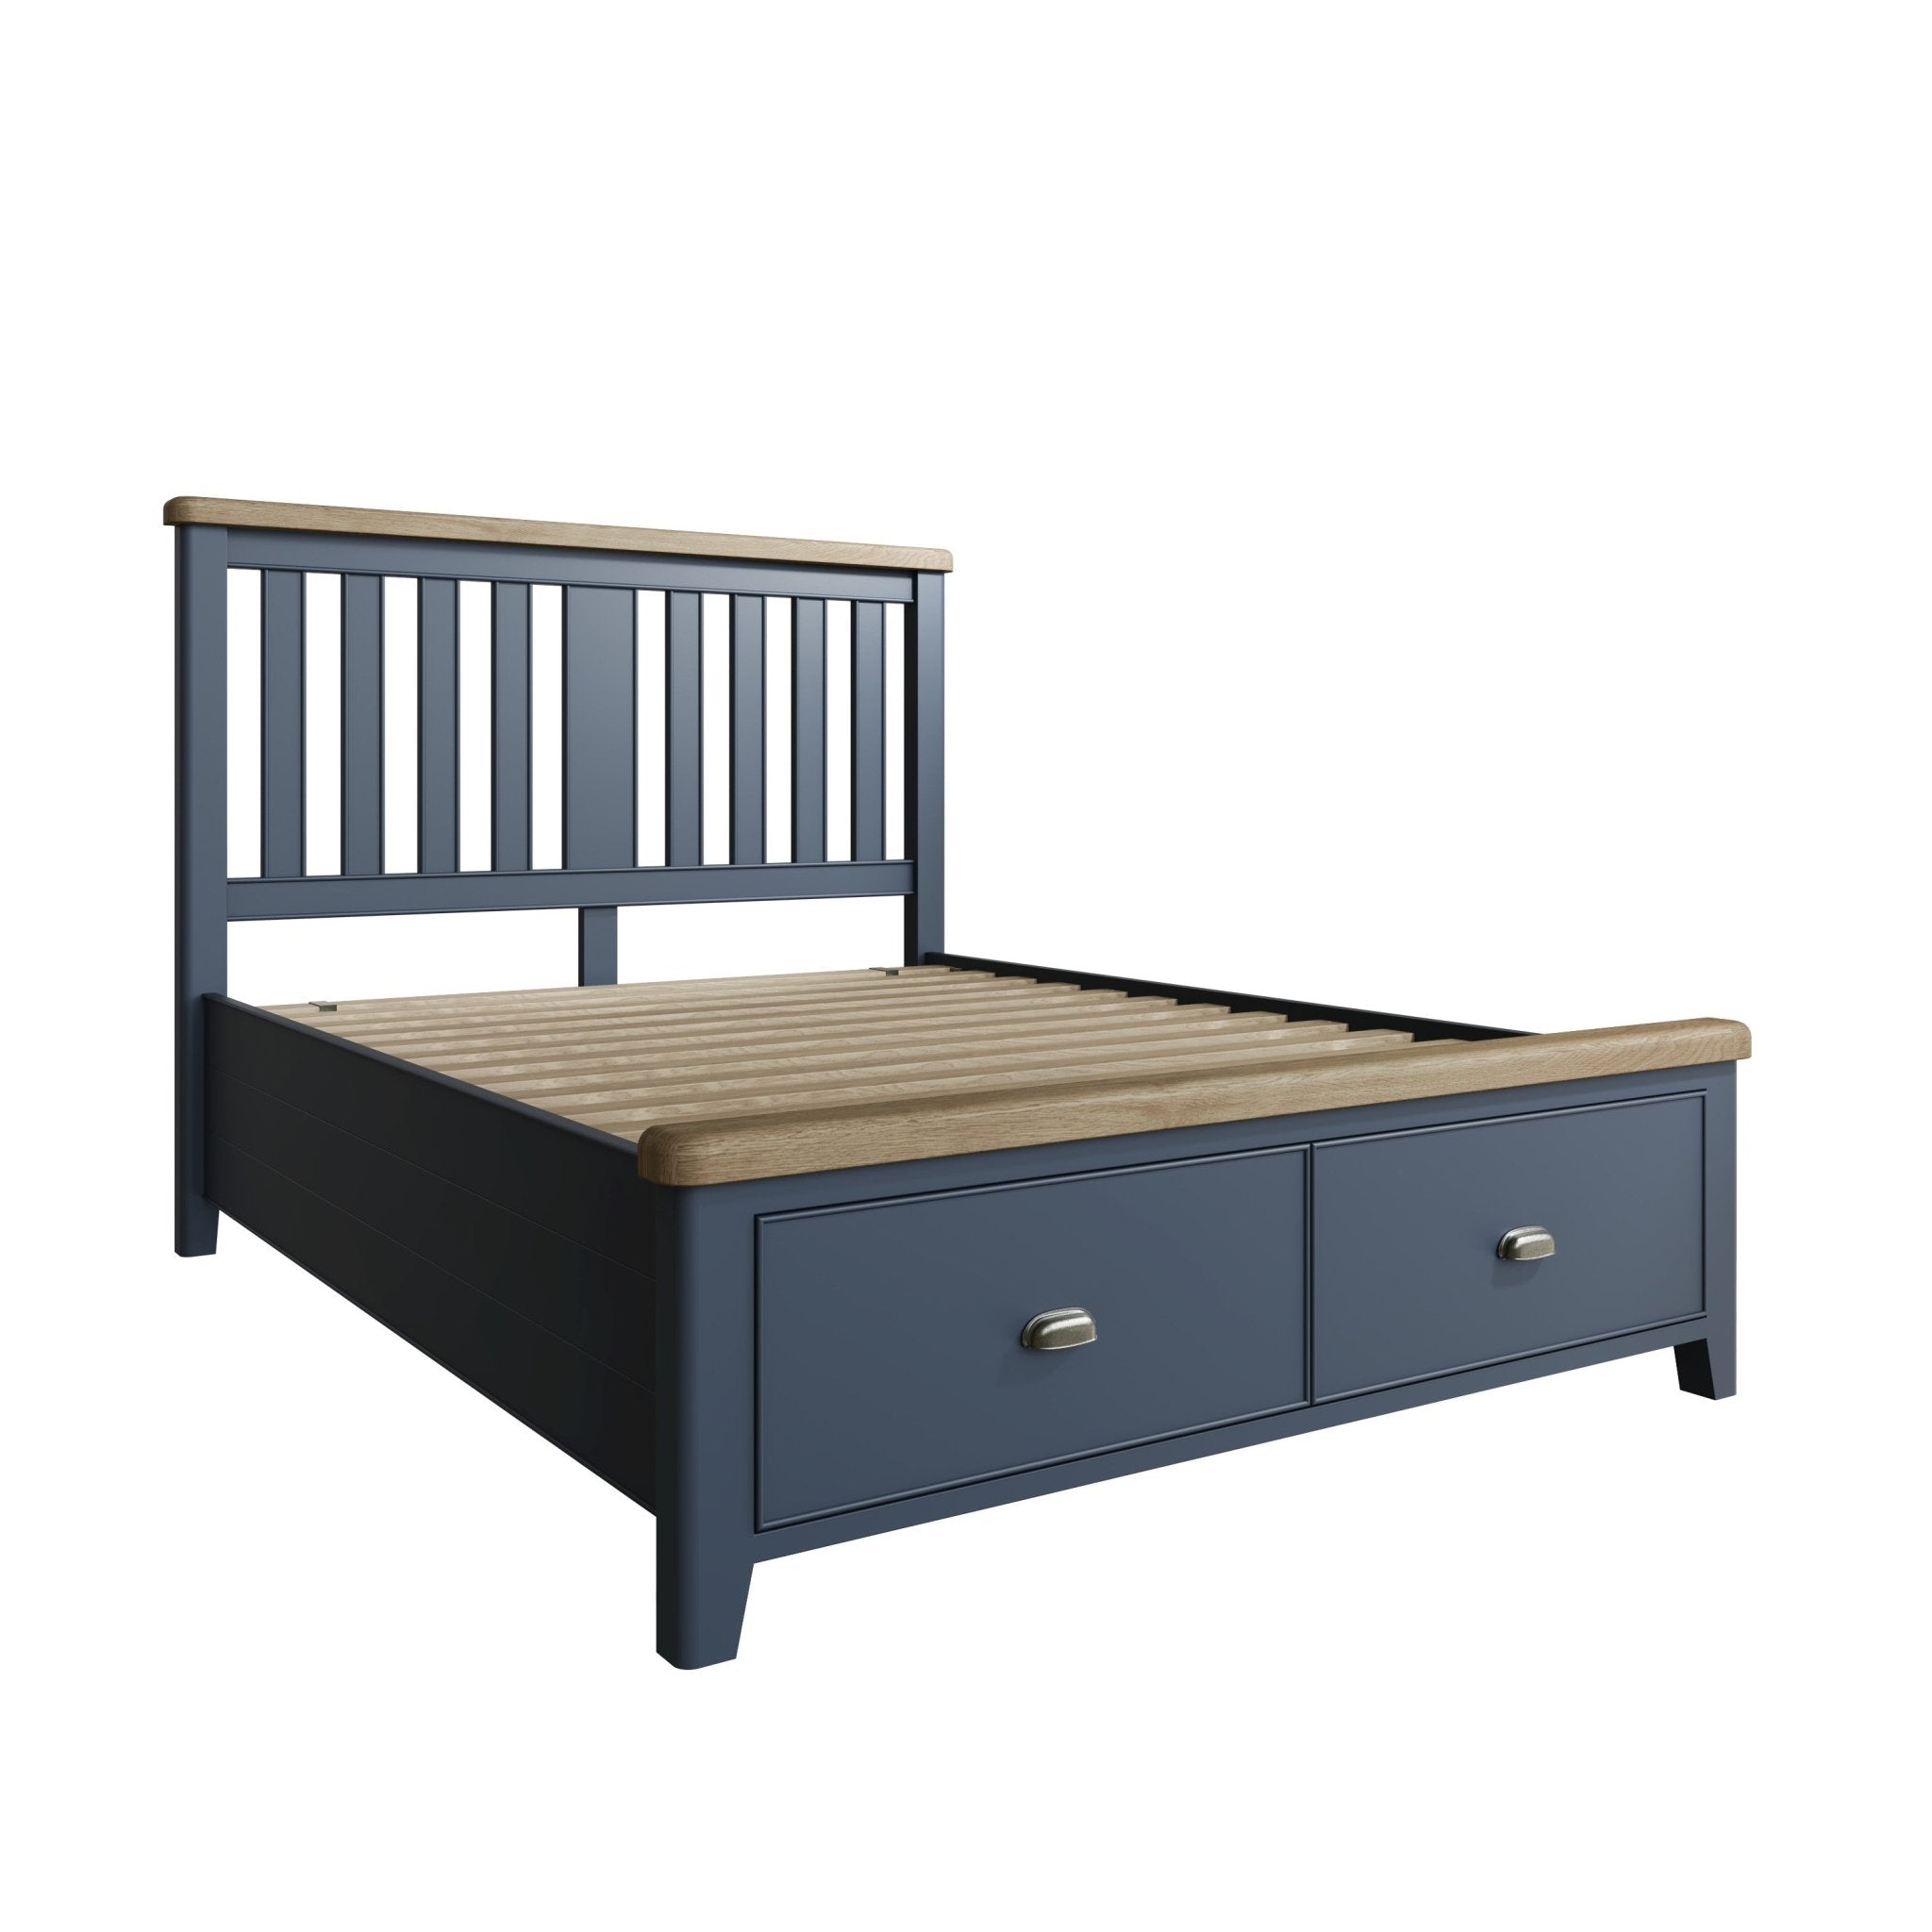 Rogate Blue 4'6 Double Bed Frame - Wooden Headboard & Drawers - Duck Barn Interiors